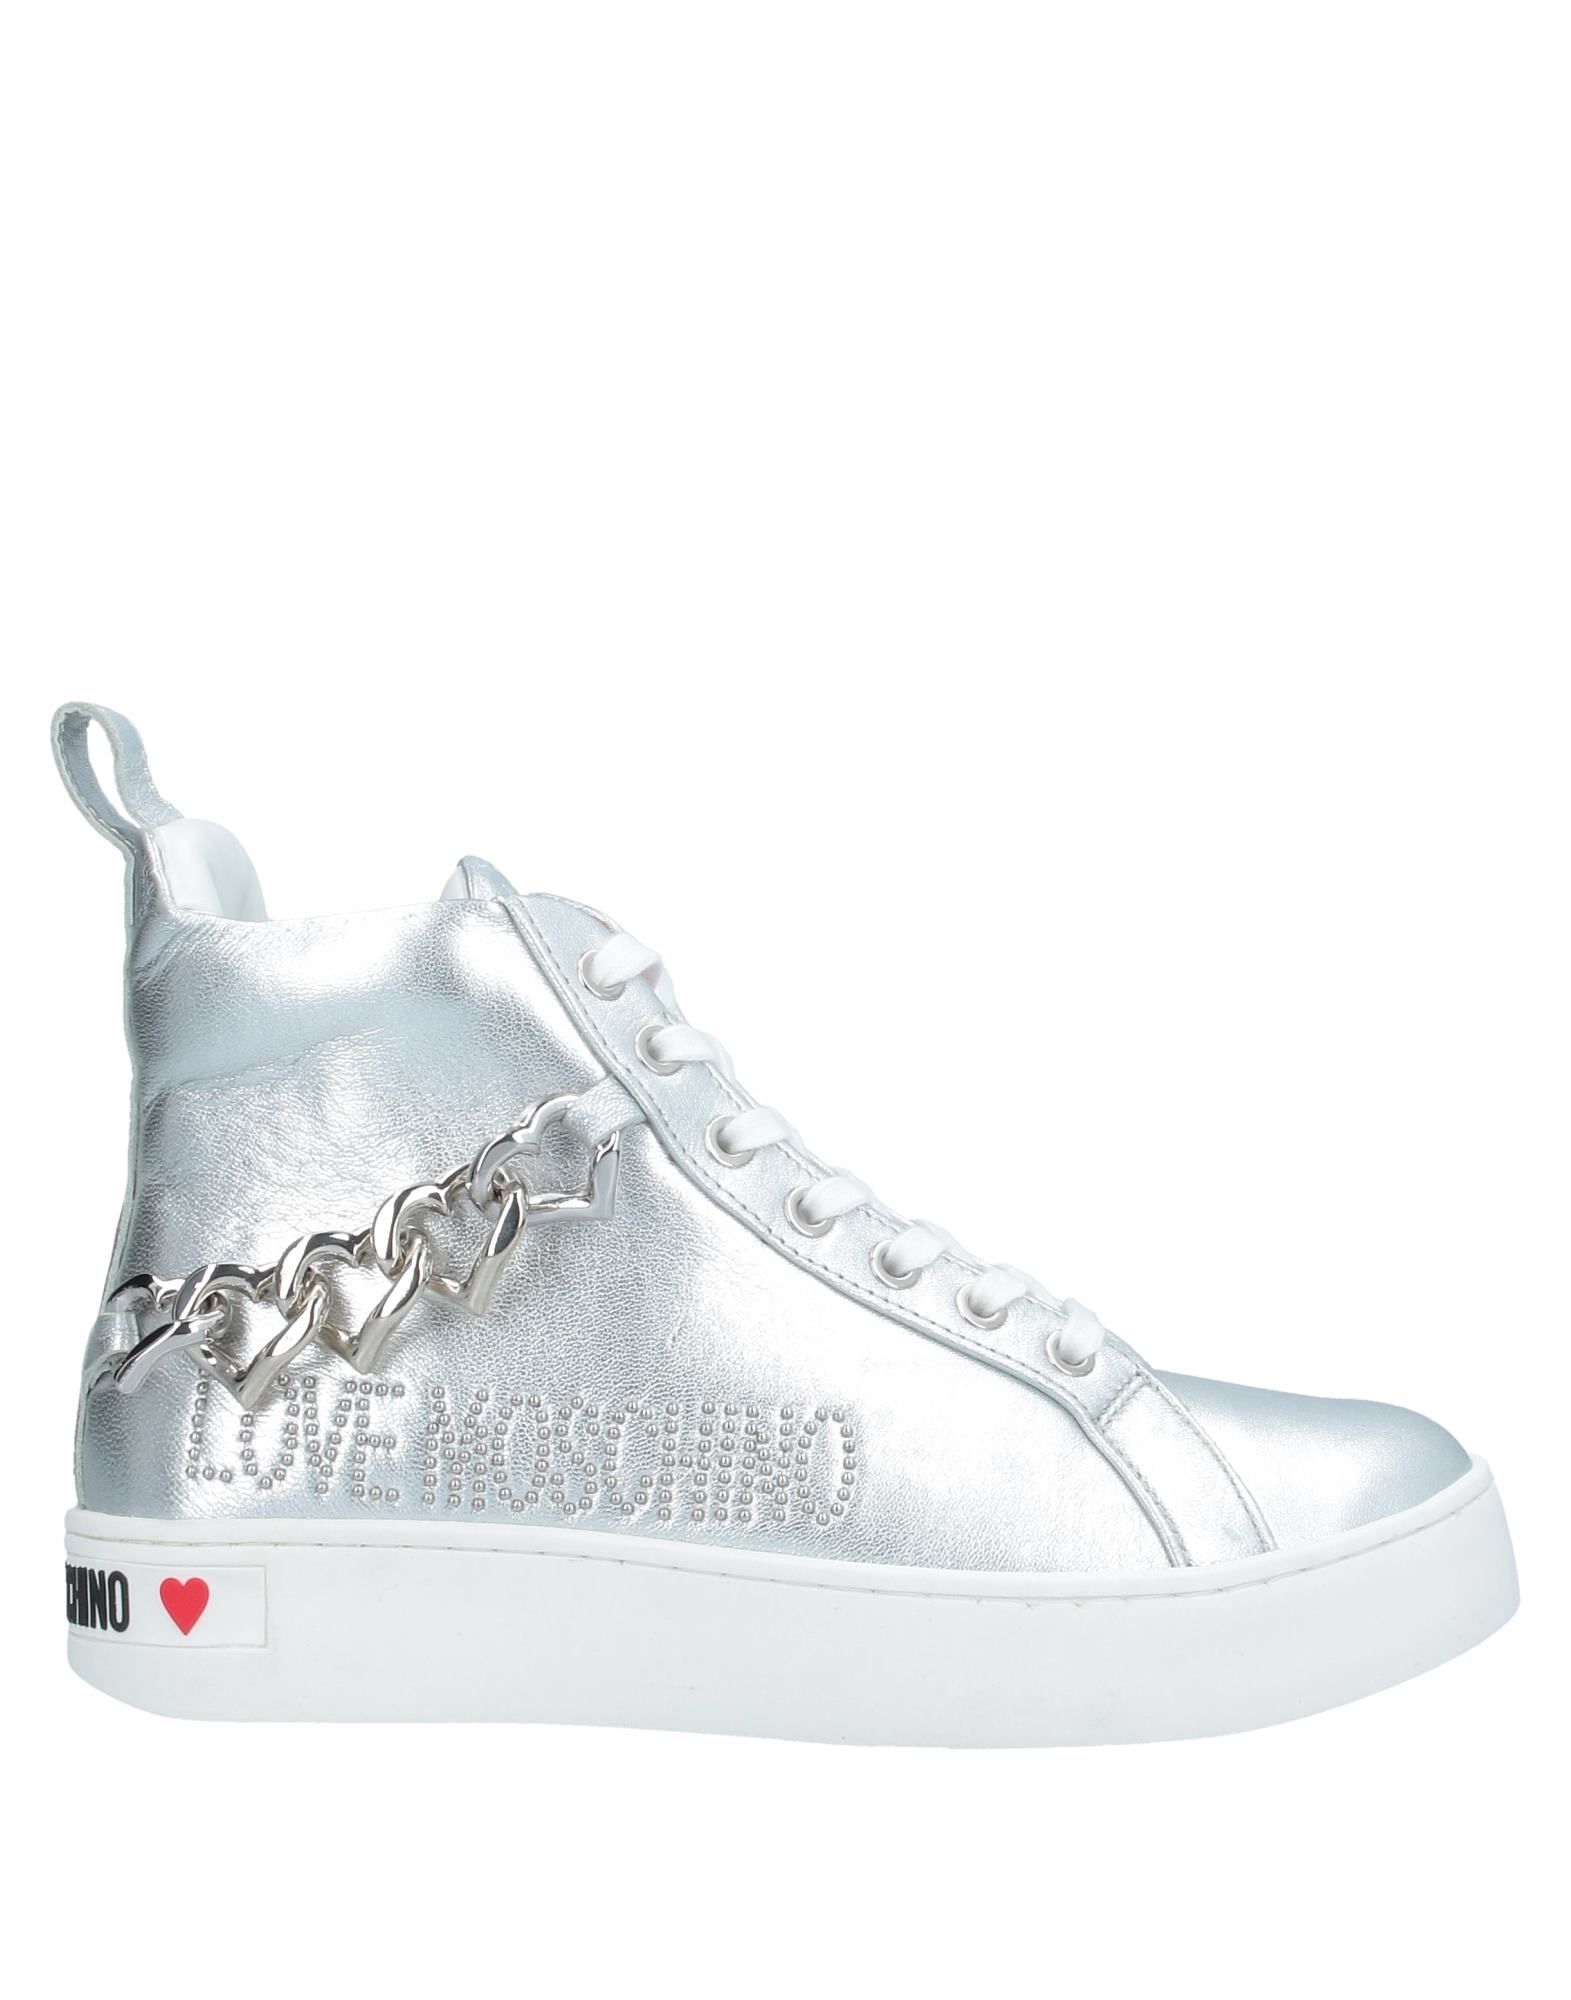 LOVE MOSCHINO High-tops & sneakers - Item 11935549